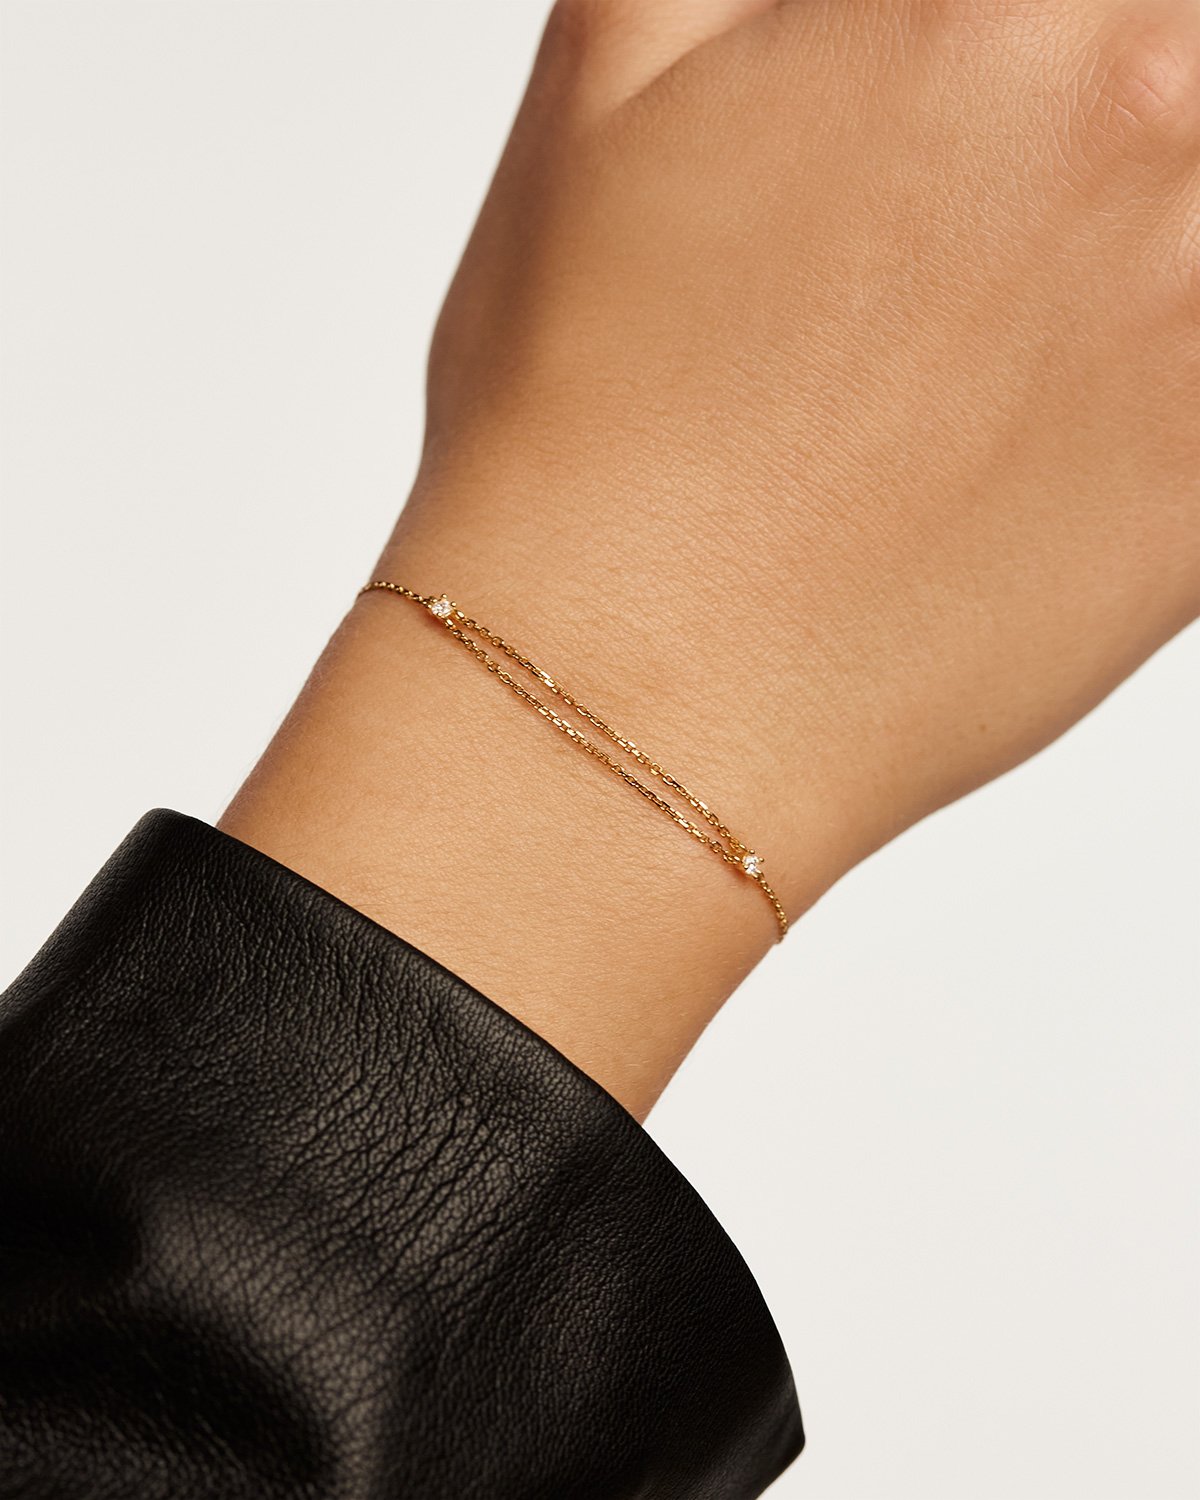 Nia Armband - 925 sterling silver / 18K gold plating